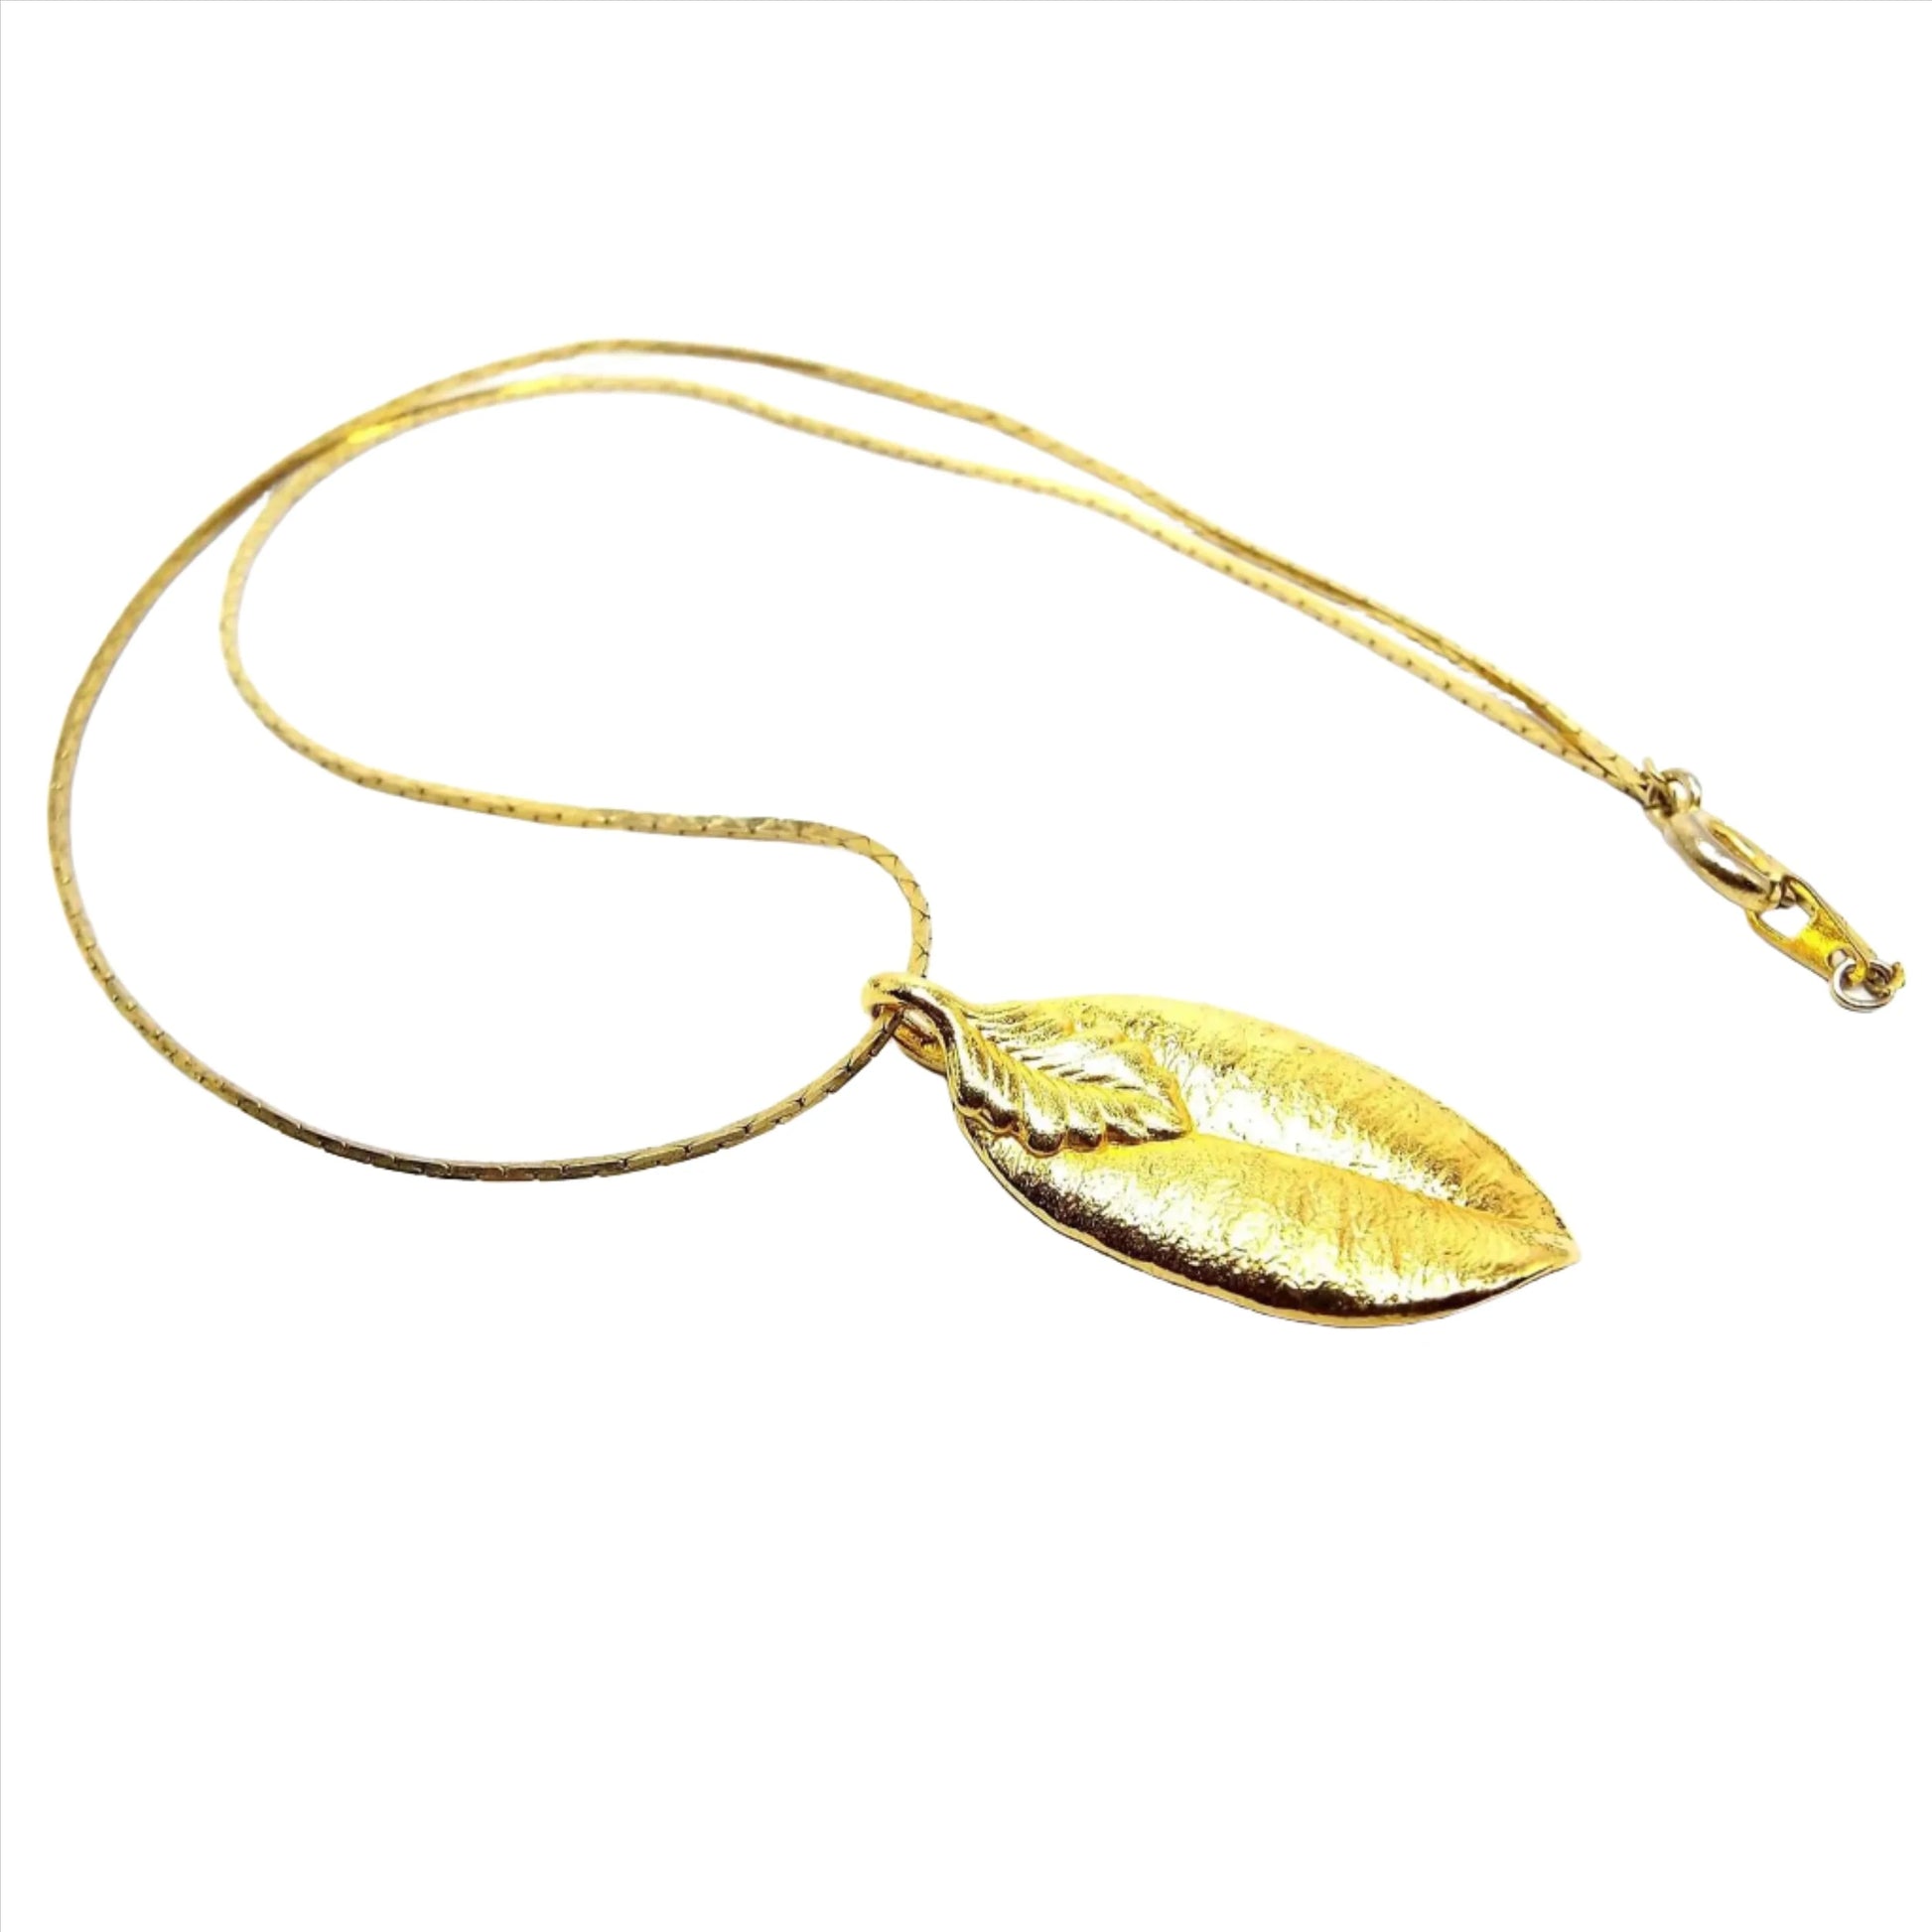 Top view of the retro vintage leaf necklace. It is gold tone in color. It has a thinner style cobra chain with a spring ring clasp at the end. The pendant is a gold plated leaf with gold tone leaf bail.